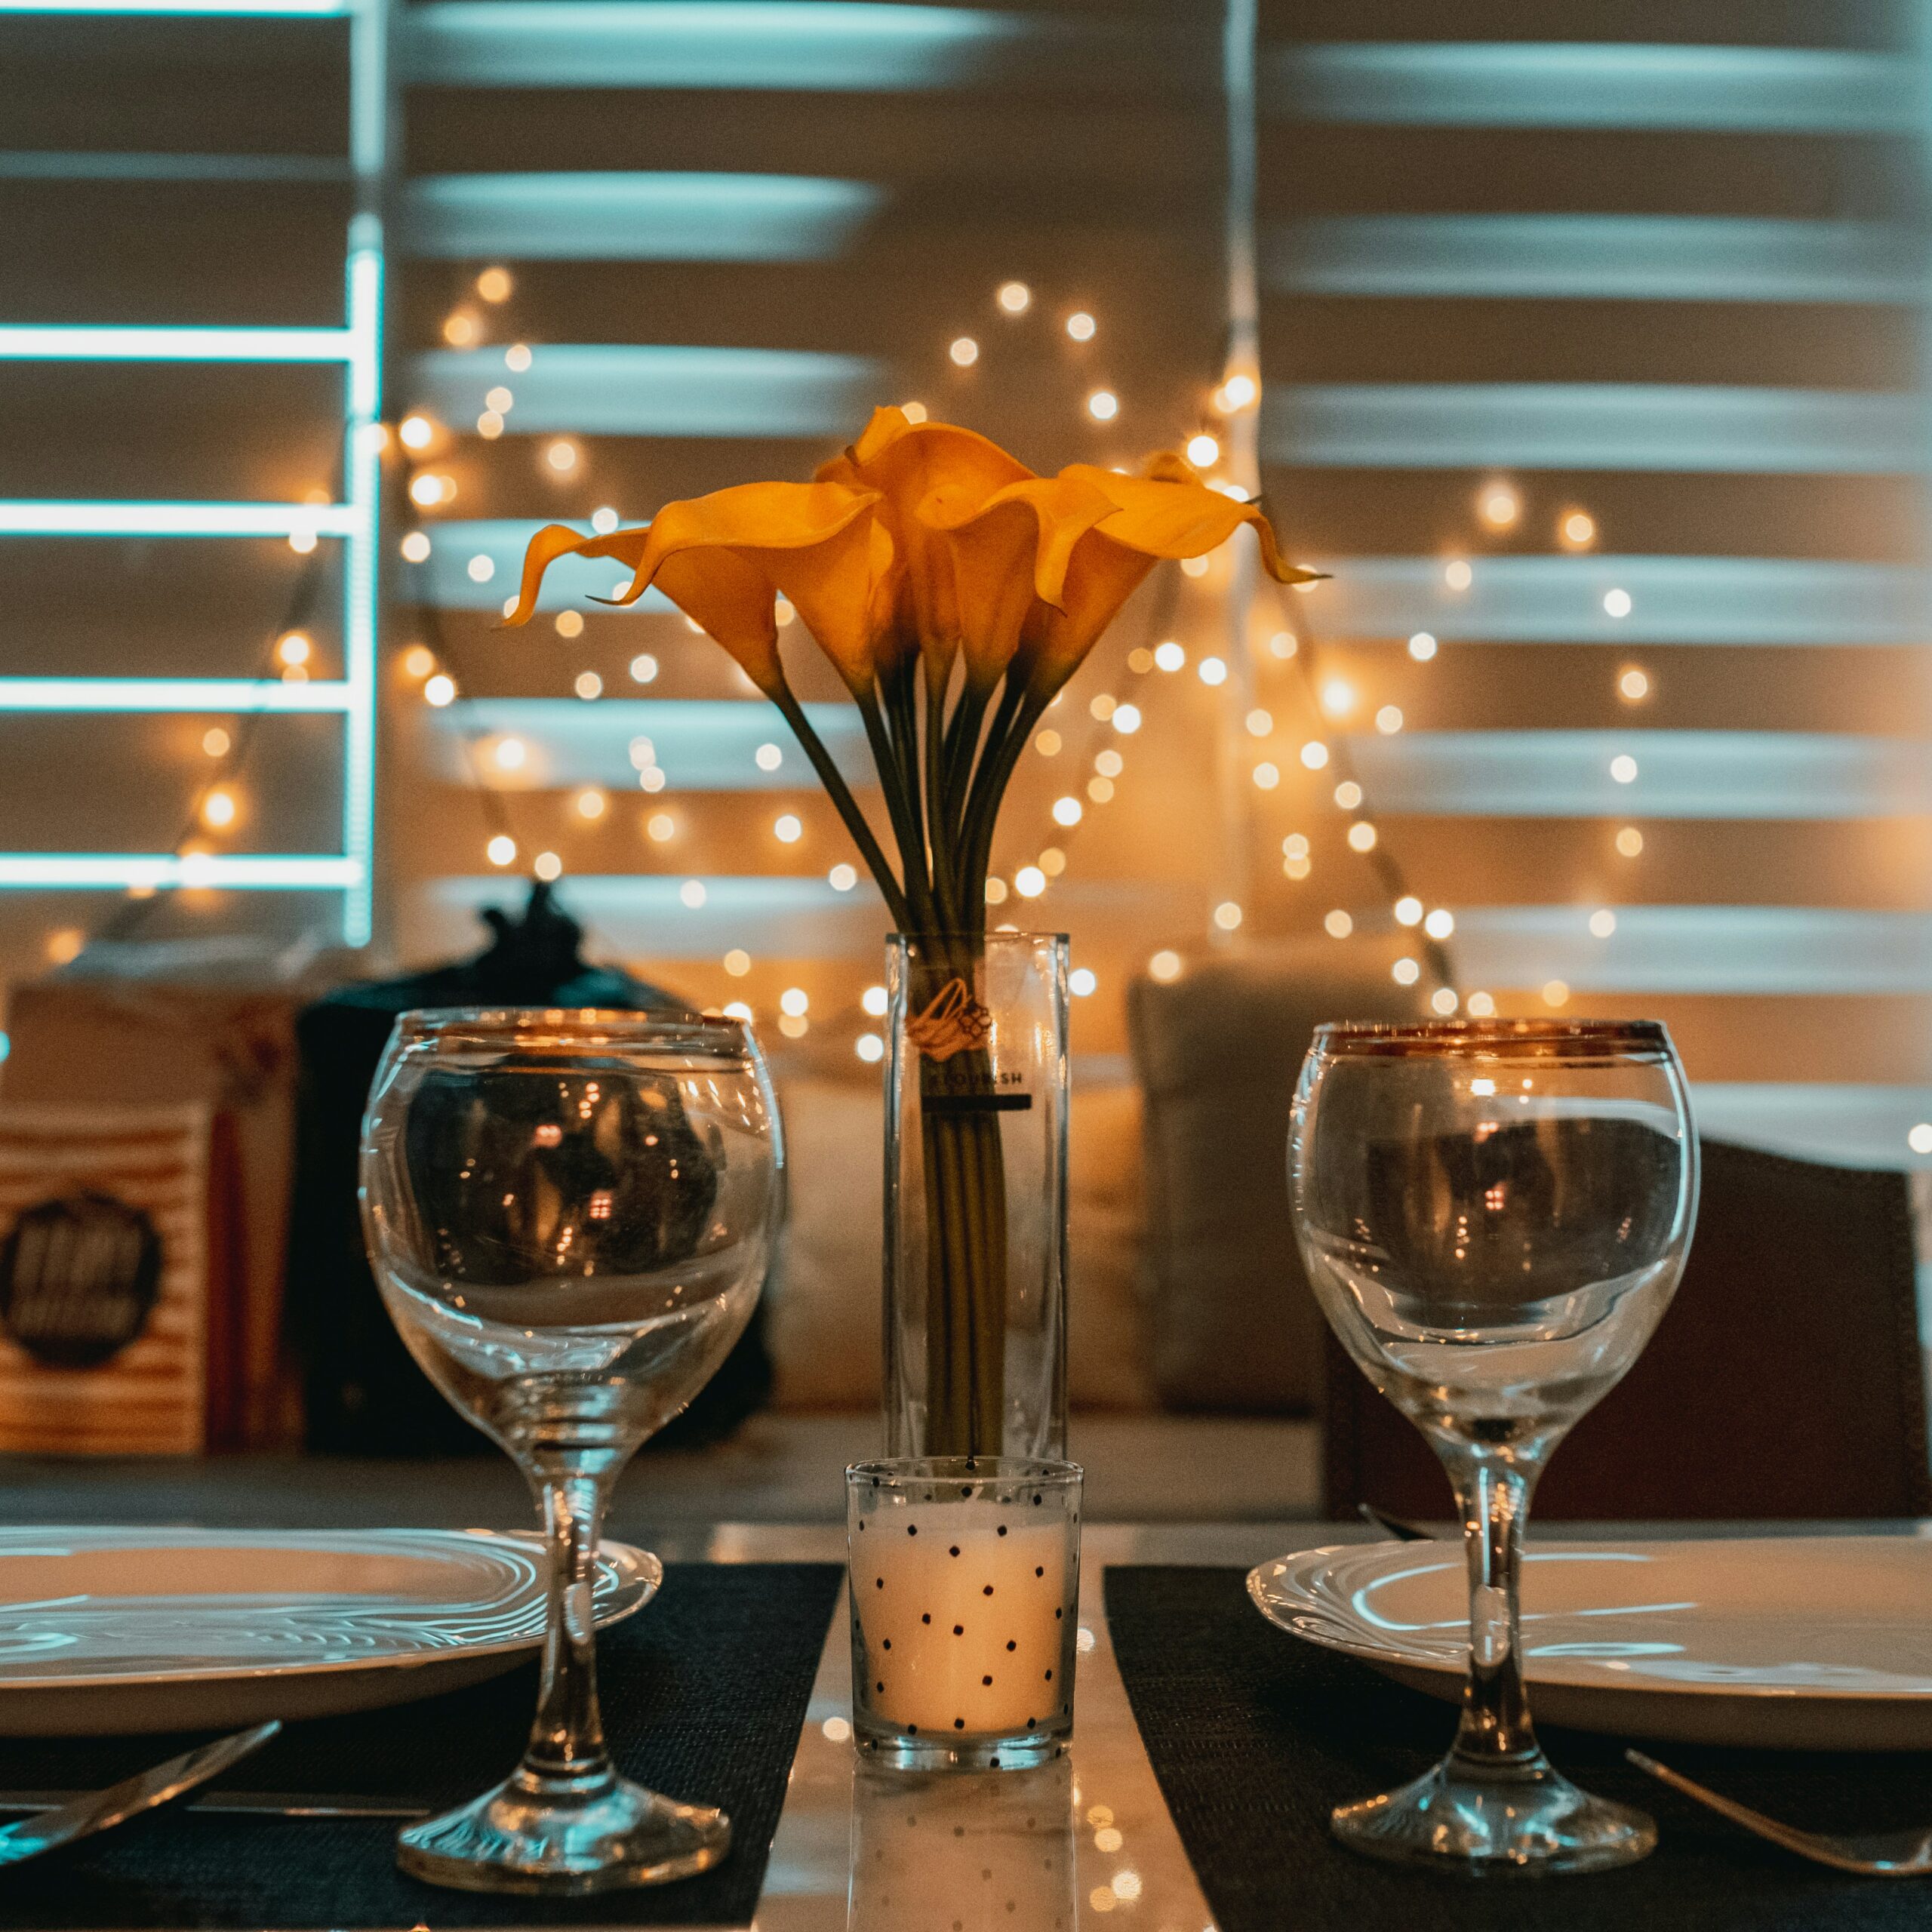 two wine glasses on a table with romantic background